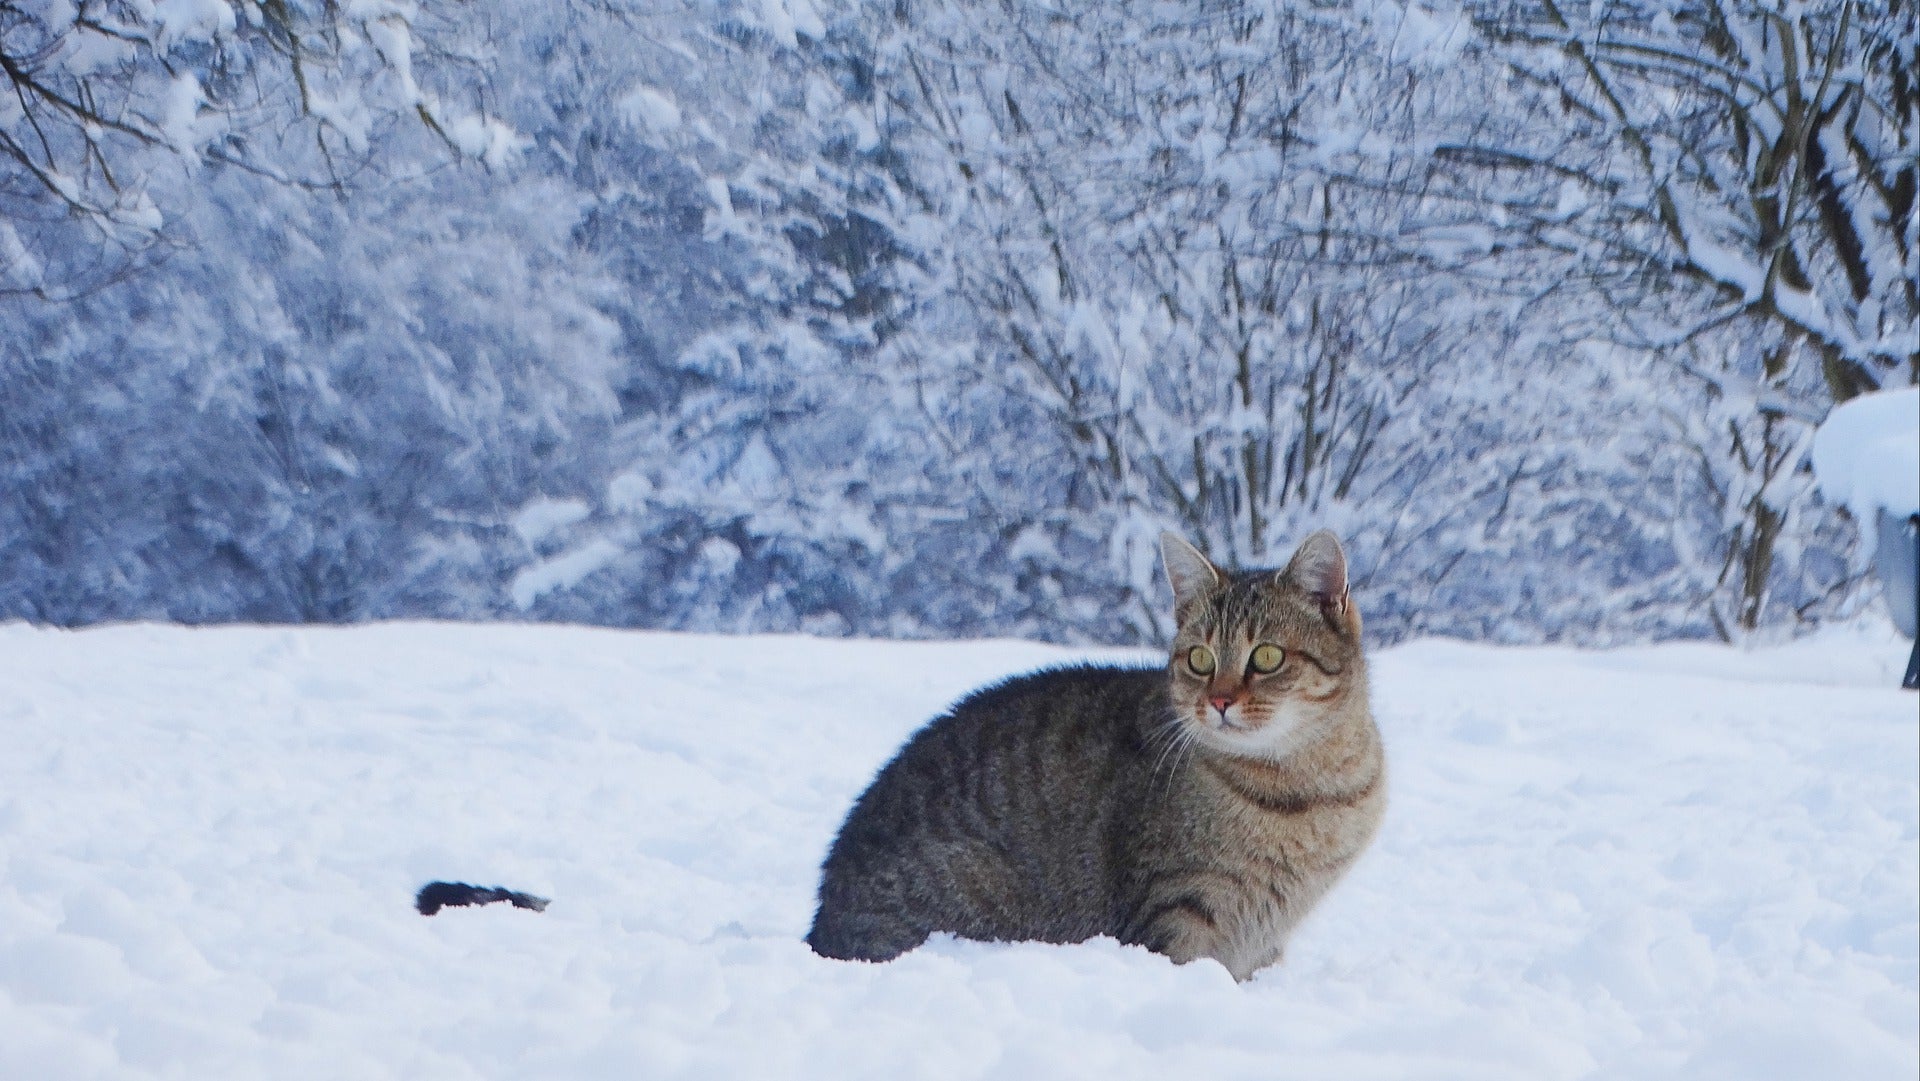 Cat standing in the snow.